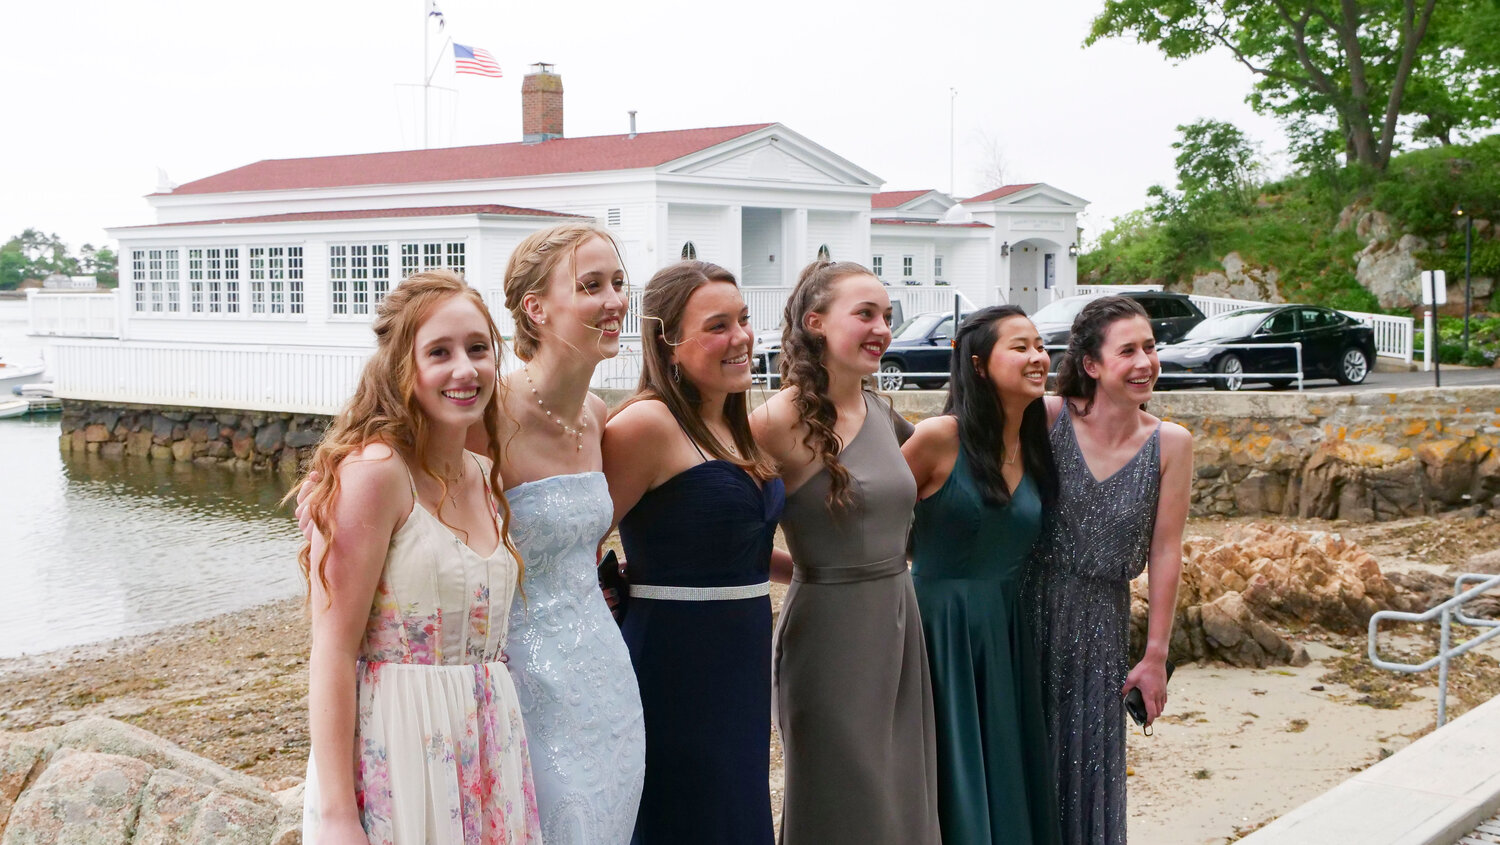 2021 Manchester Essex Regional High School Prom, Pre-Event at Tuck's Point, Manchester-by-the-Sea